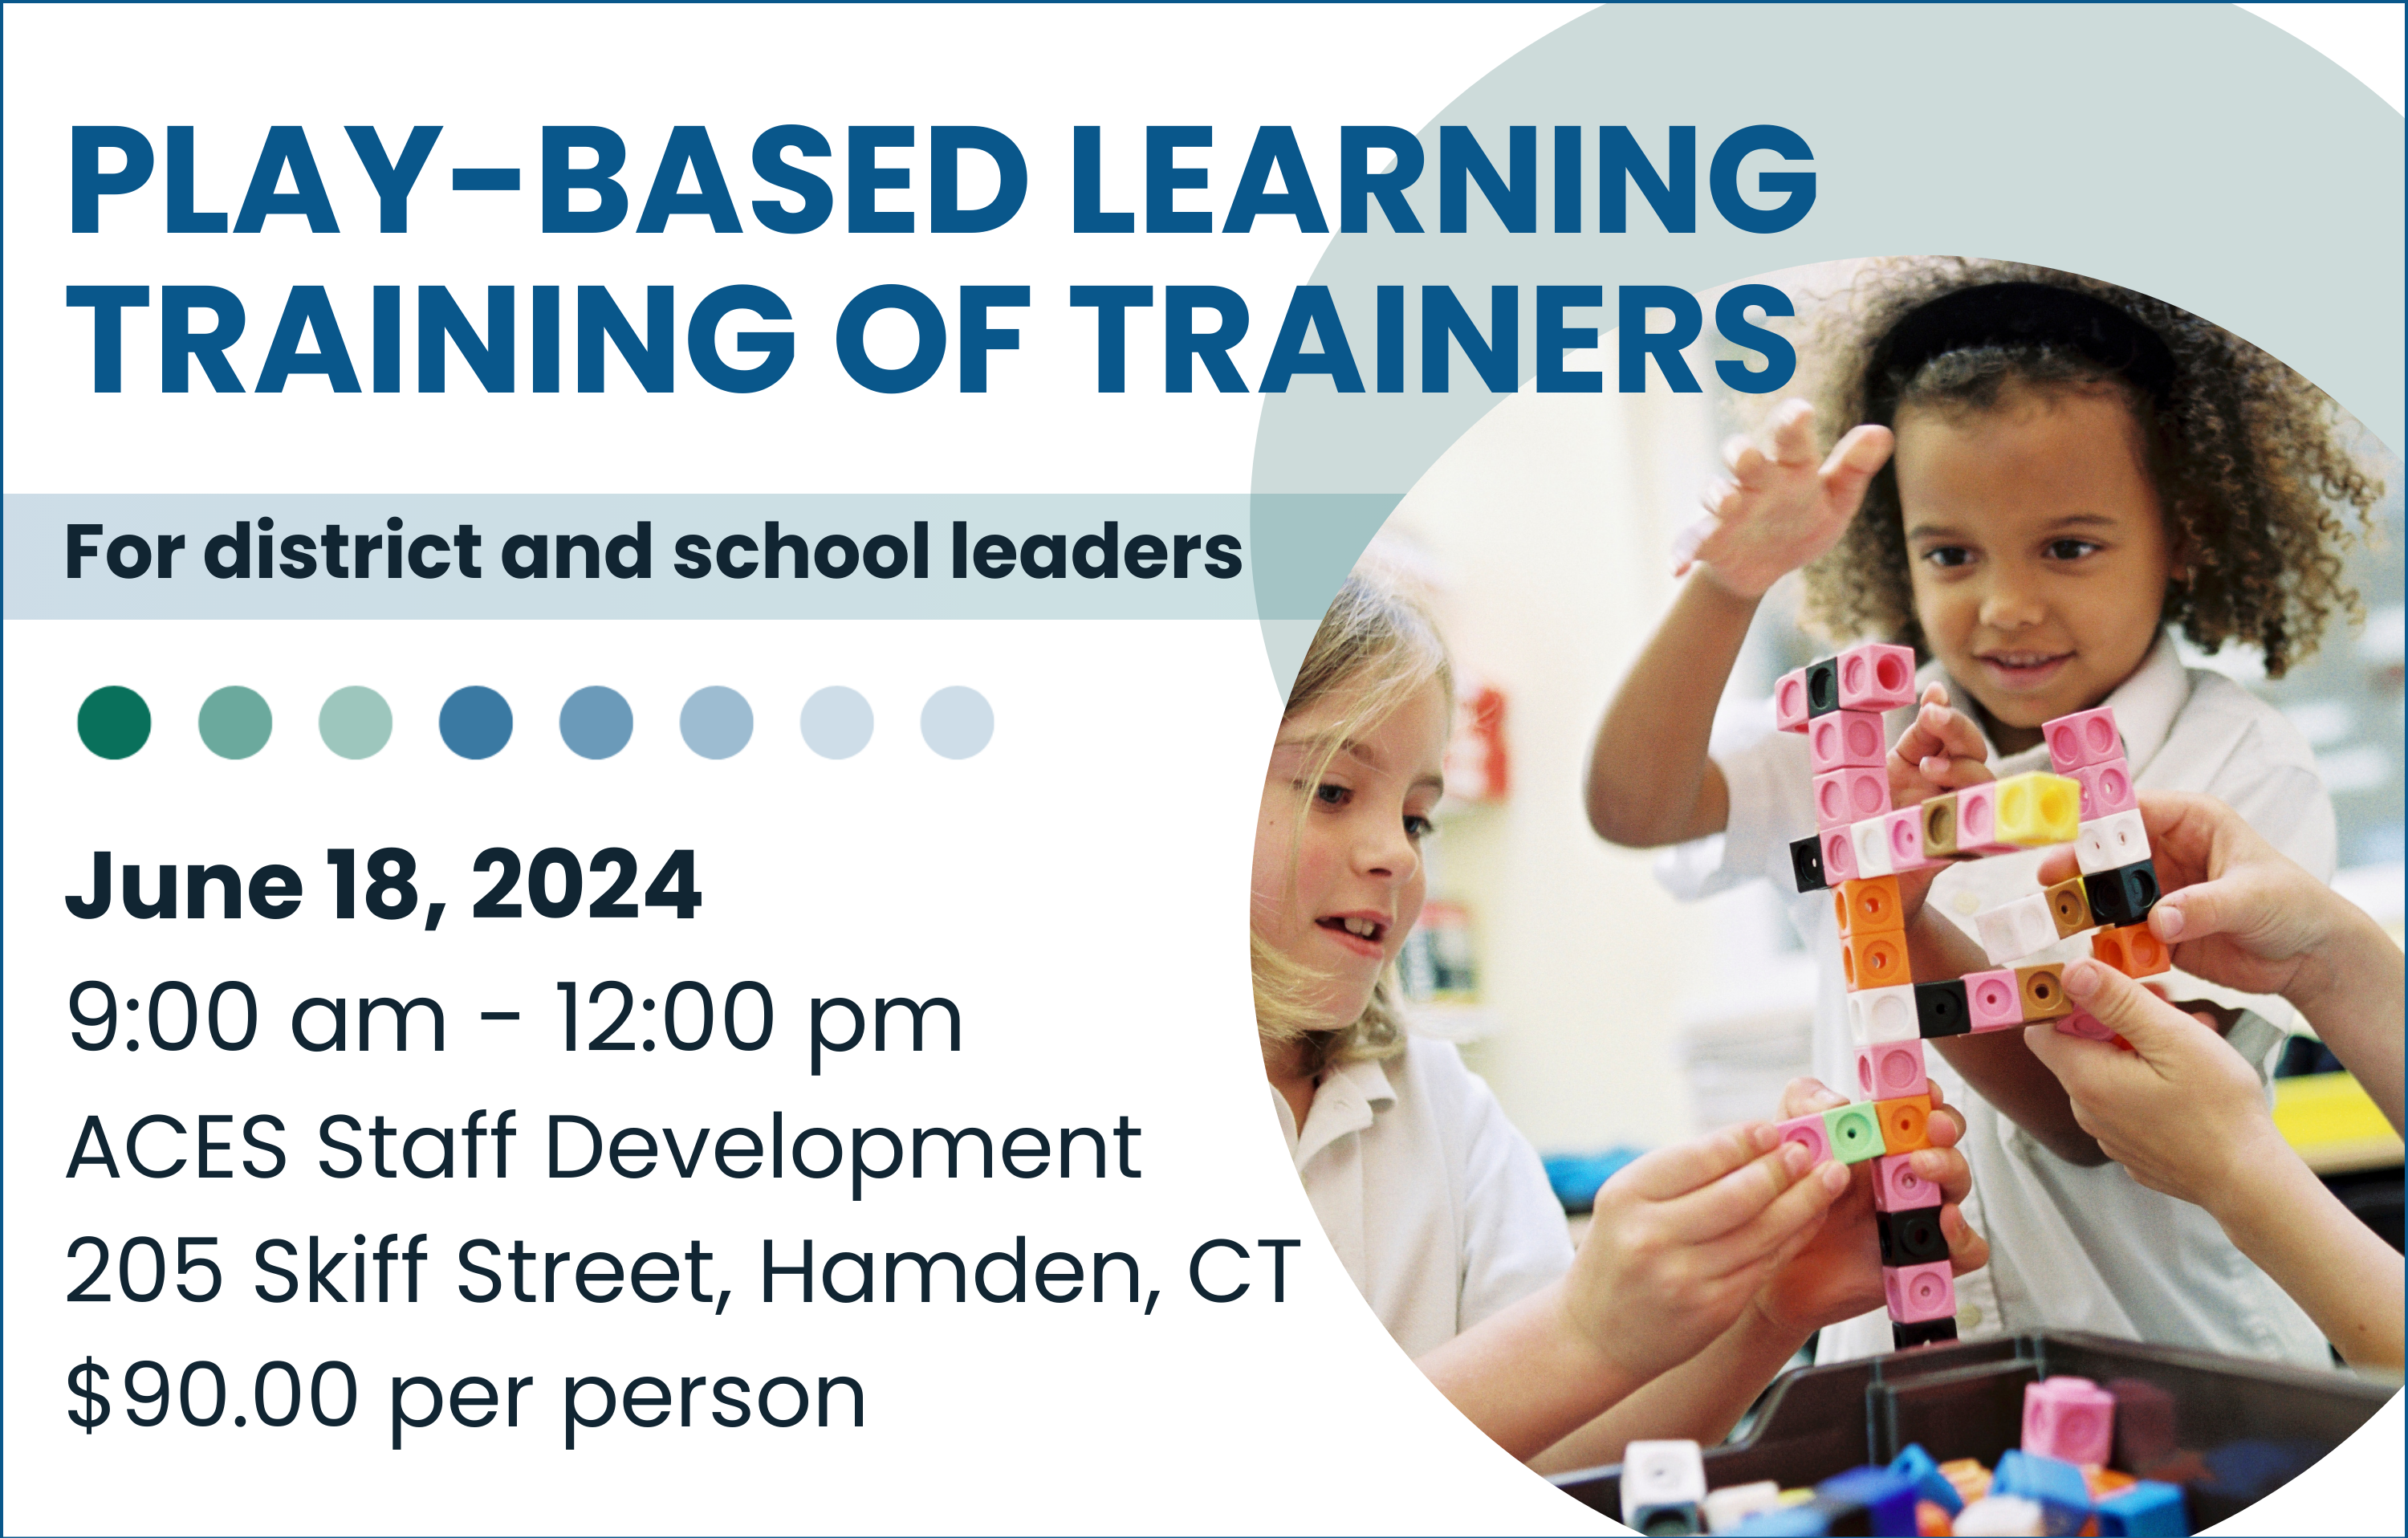 Register for Play-Based Learning Training of Trainers